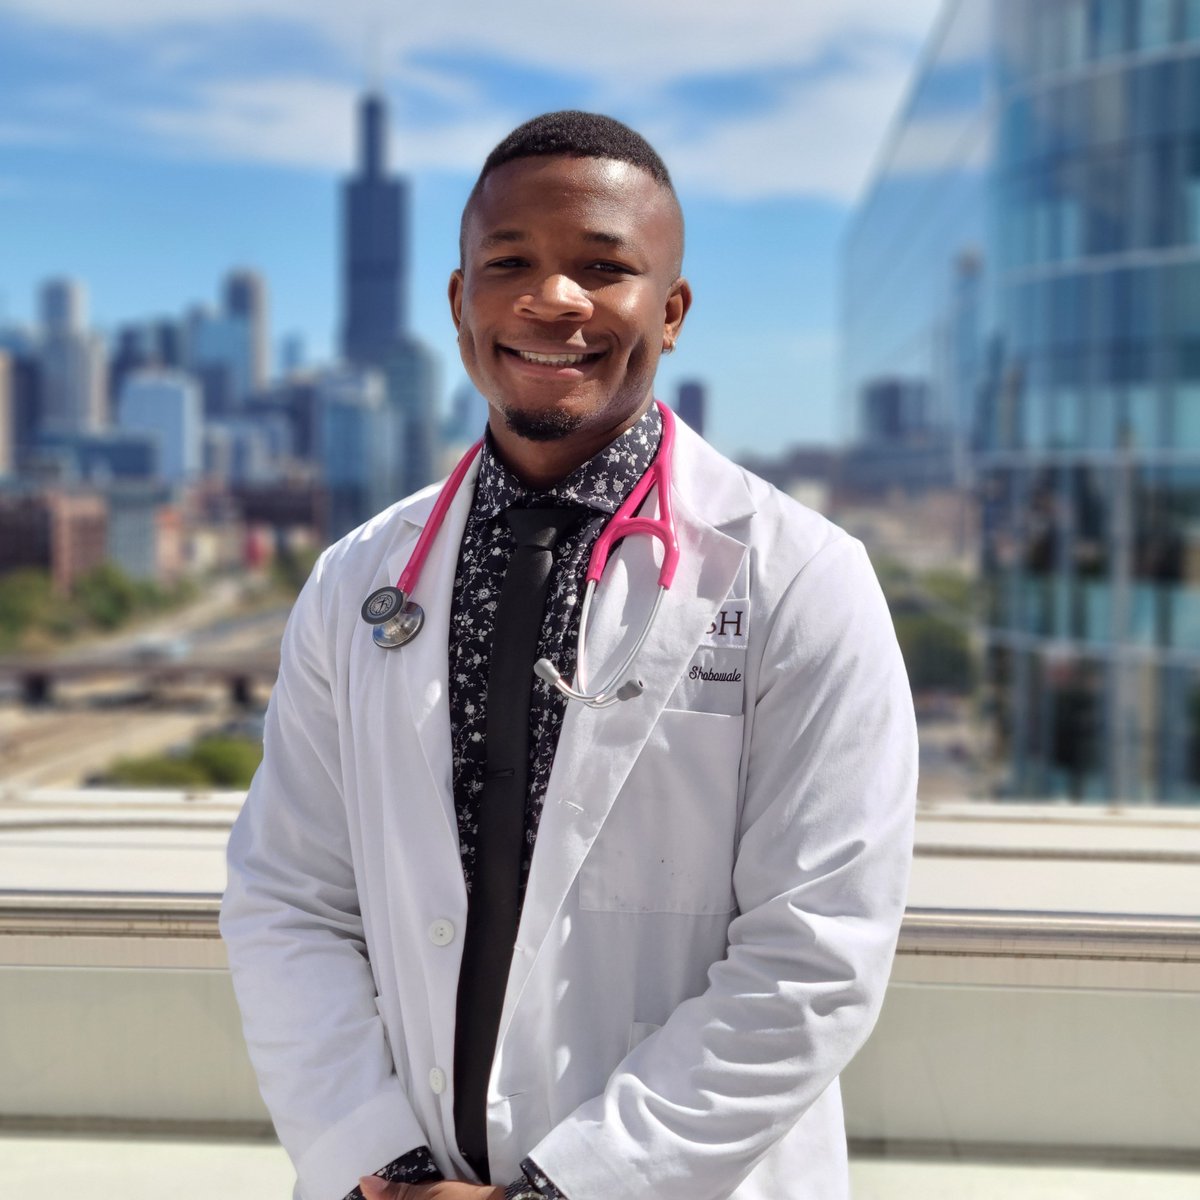 Hello #EMTwitter! My name's Ola Shobowale & I'm an #EMbound MS4 @rushumedcollege in Chicago. Interests include social EM, LGBTQ+ health, mental health, addiction med, poverty & homelessness. Also love fashion, music & skateboarding! Exited for this journey😎#Match2022 #MedTwitter